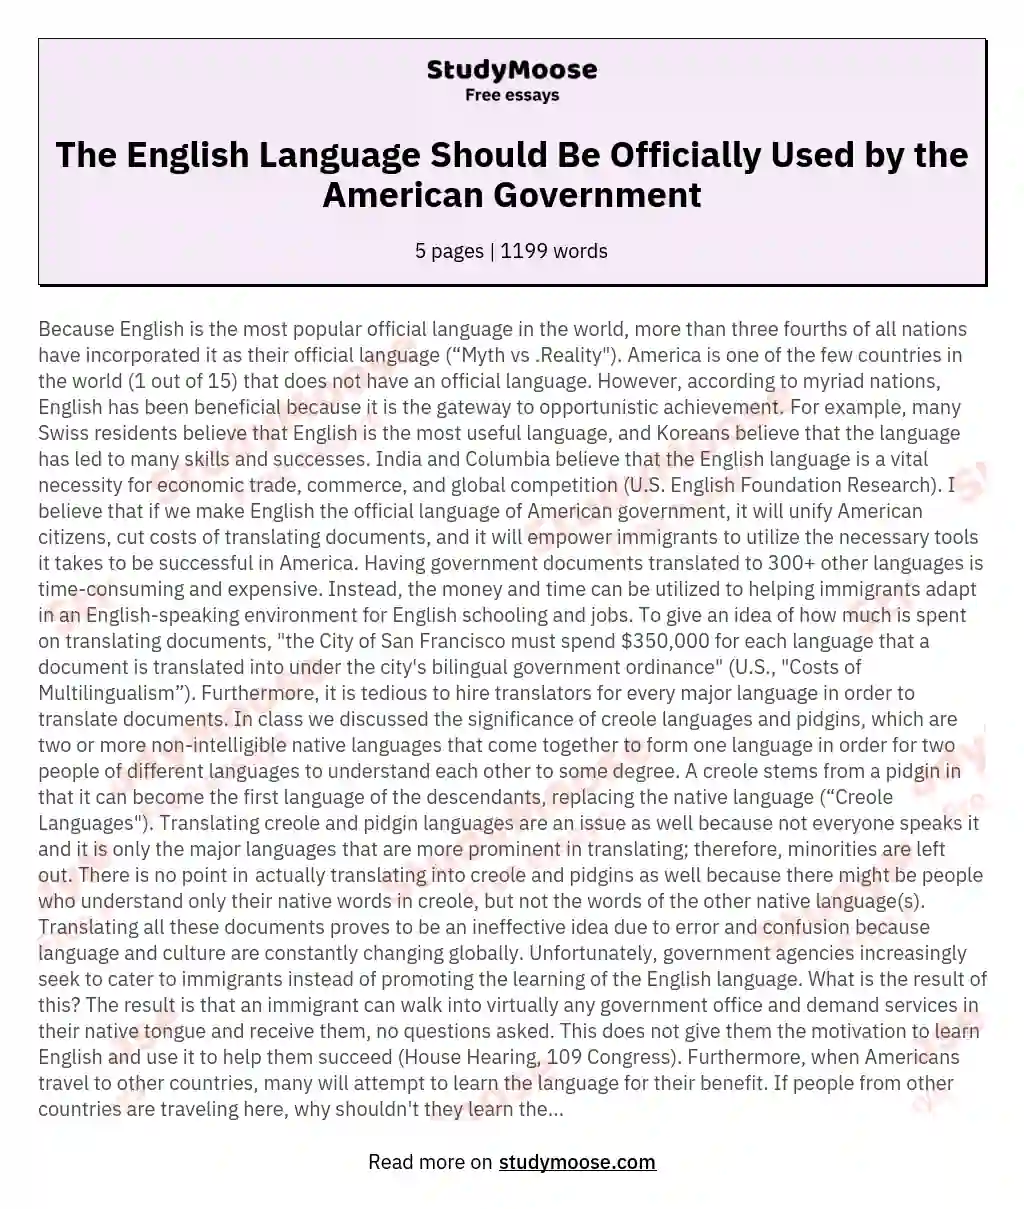 The English Language Should Be Officially Used by the American Government essay